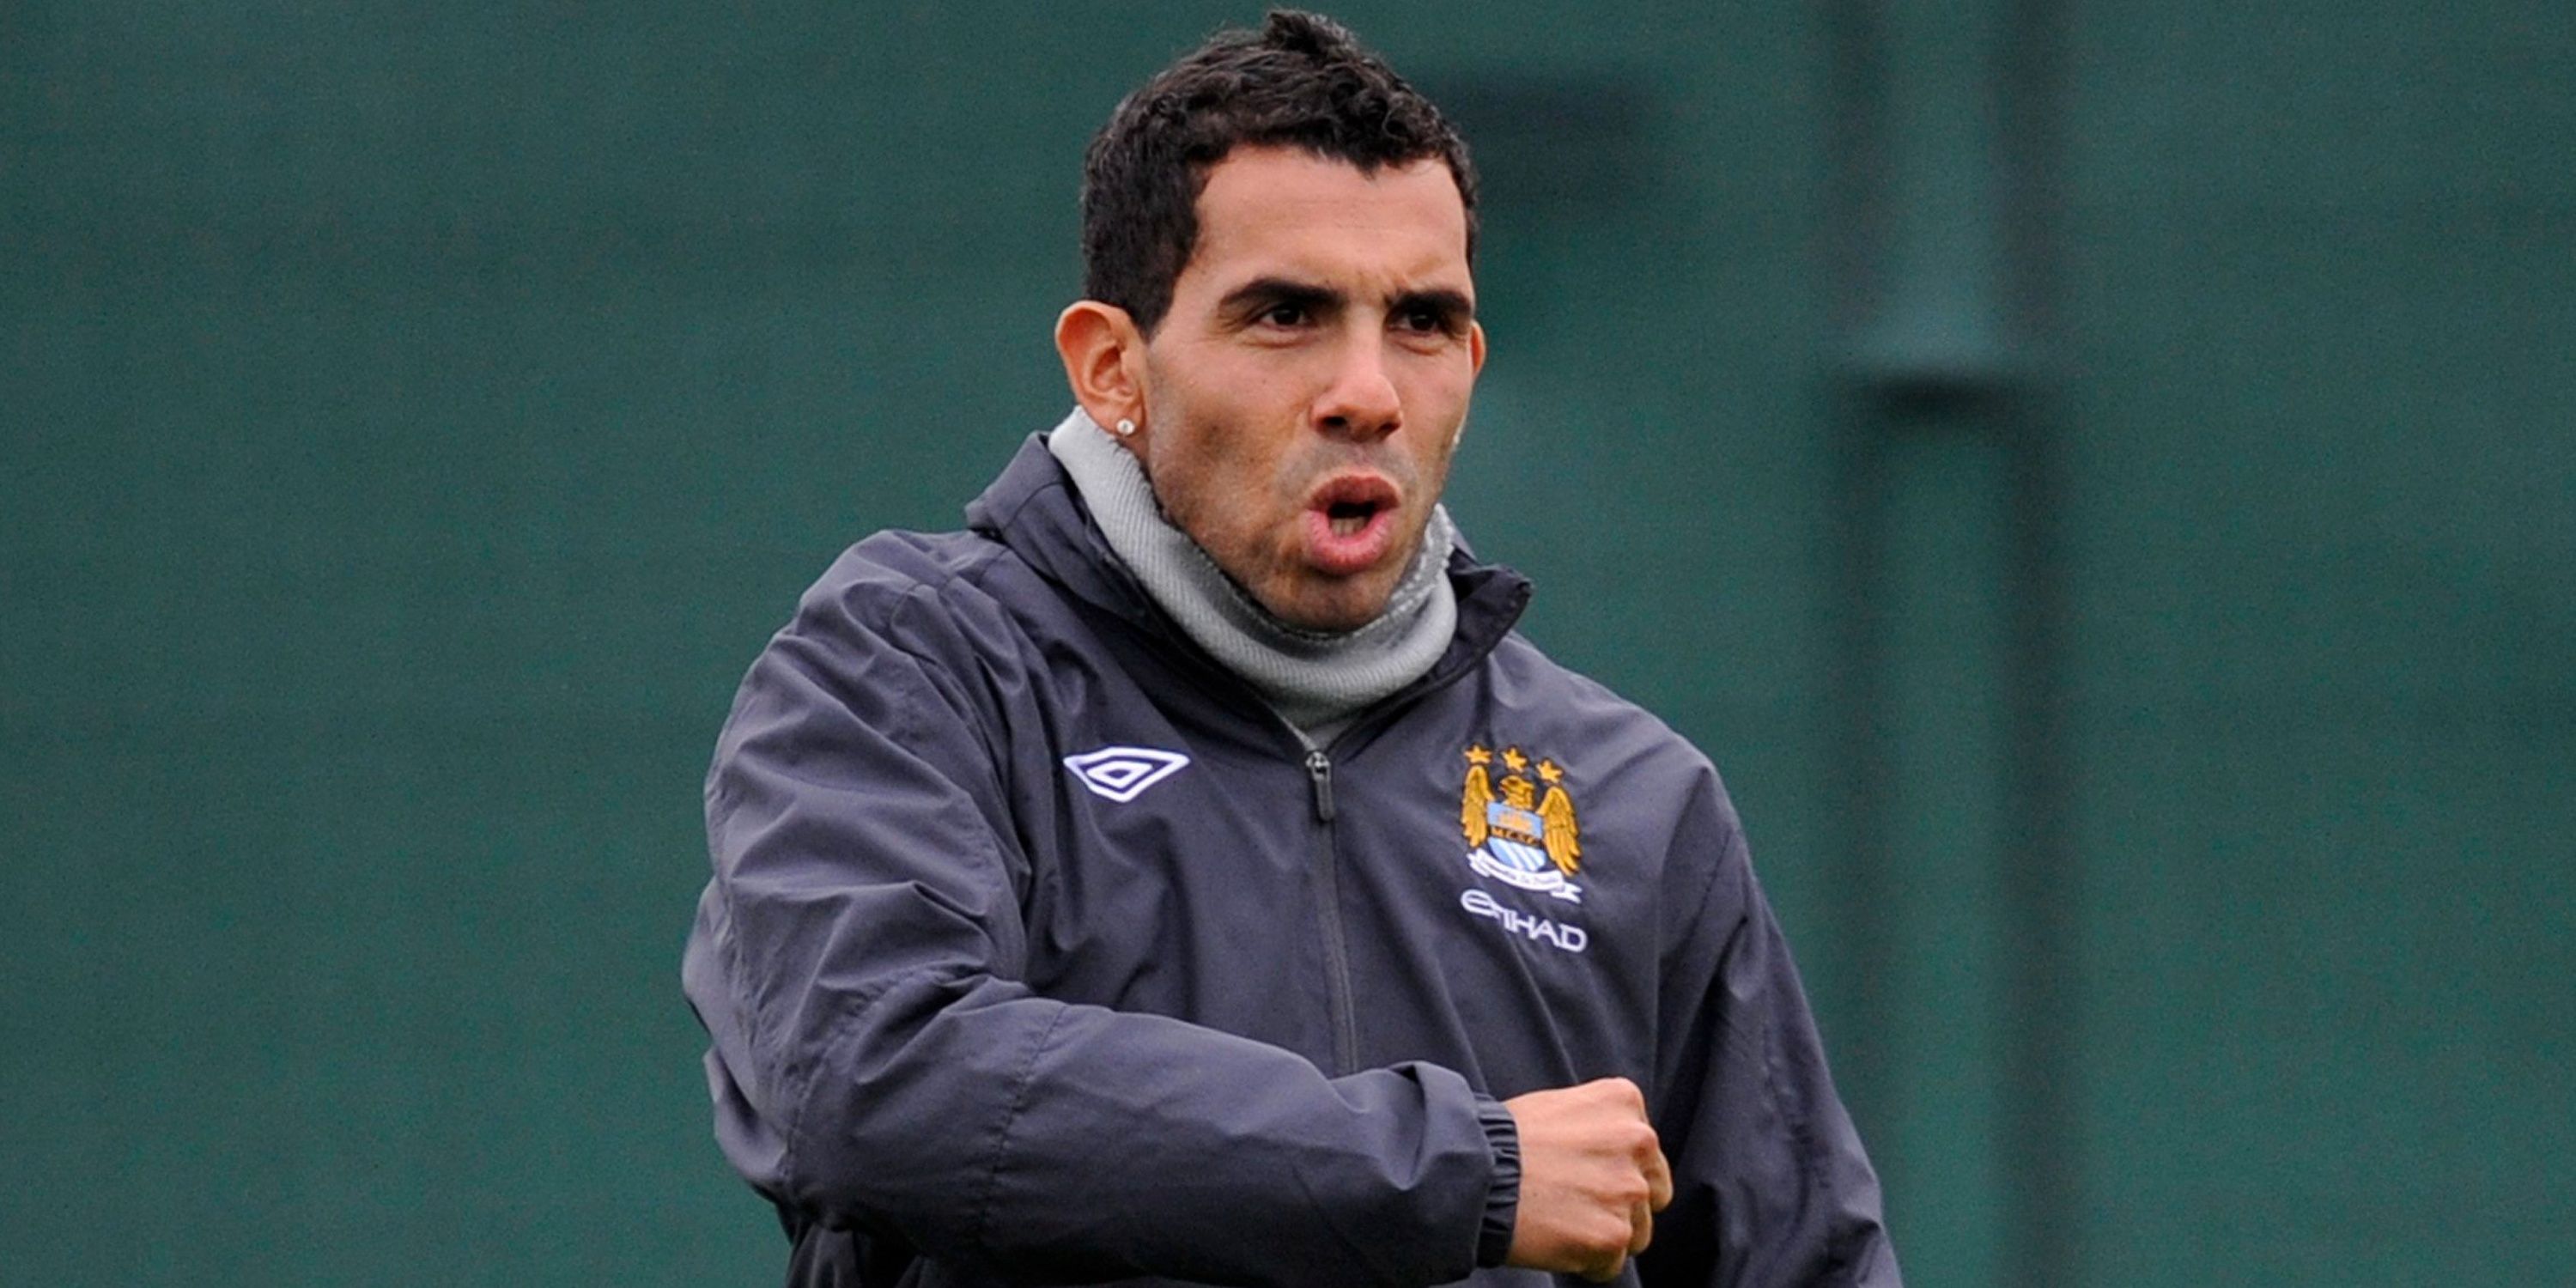 Carlos Tevez in action for Manchester City